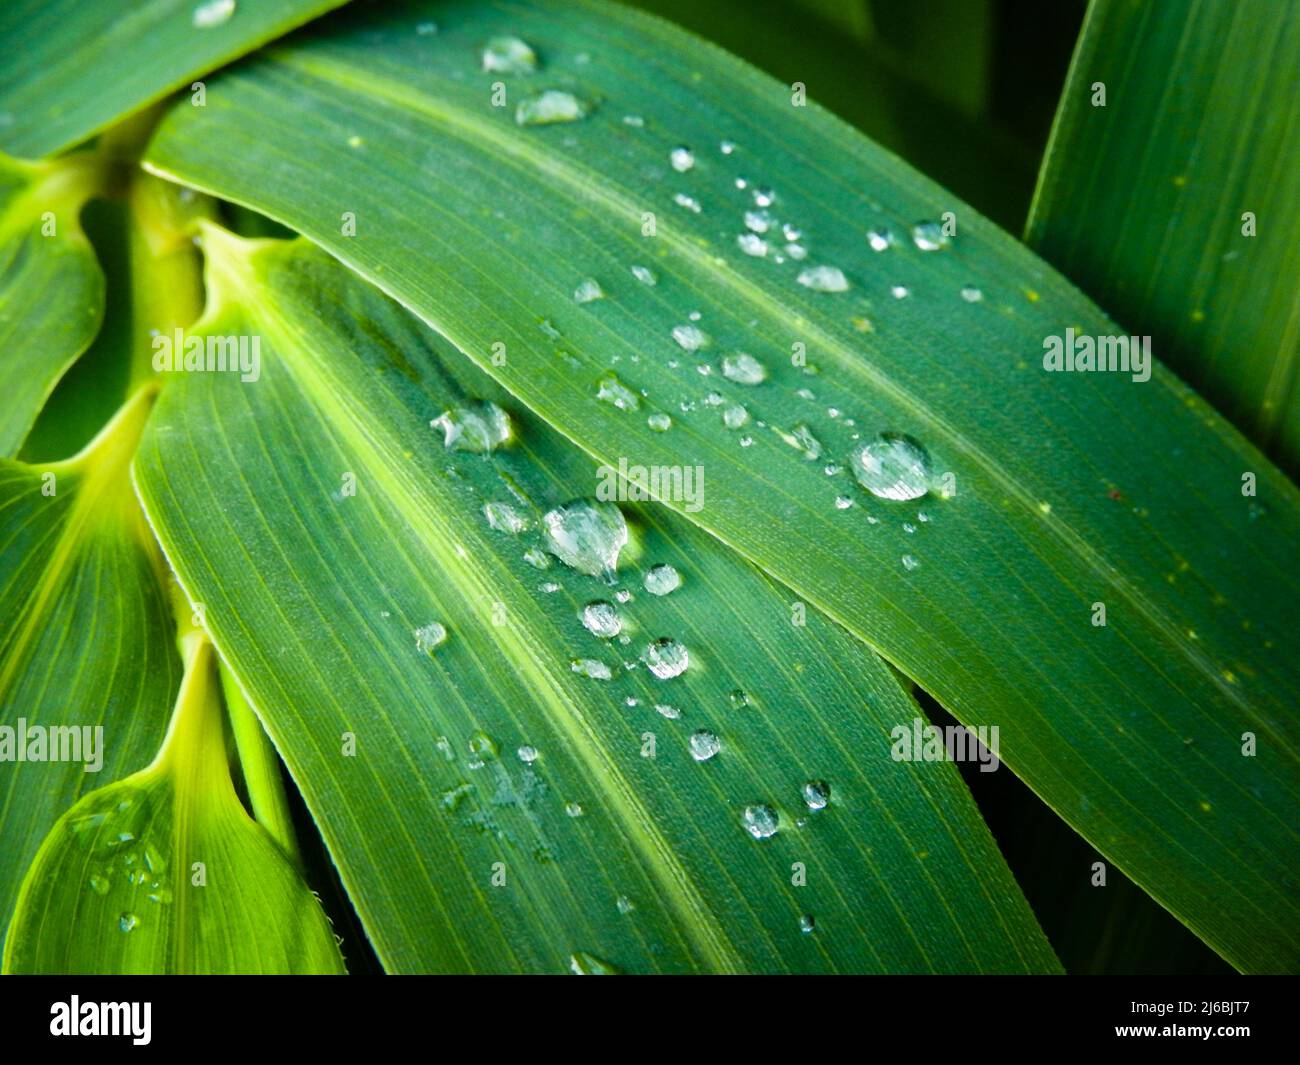 Dew Drops on Bamboo Leaves. Bambusa tulda, or Indian timber bamboo, is considered to be one of the most useful bamboo species. It is native to the Stock Photo